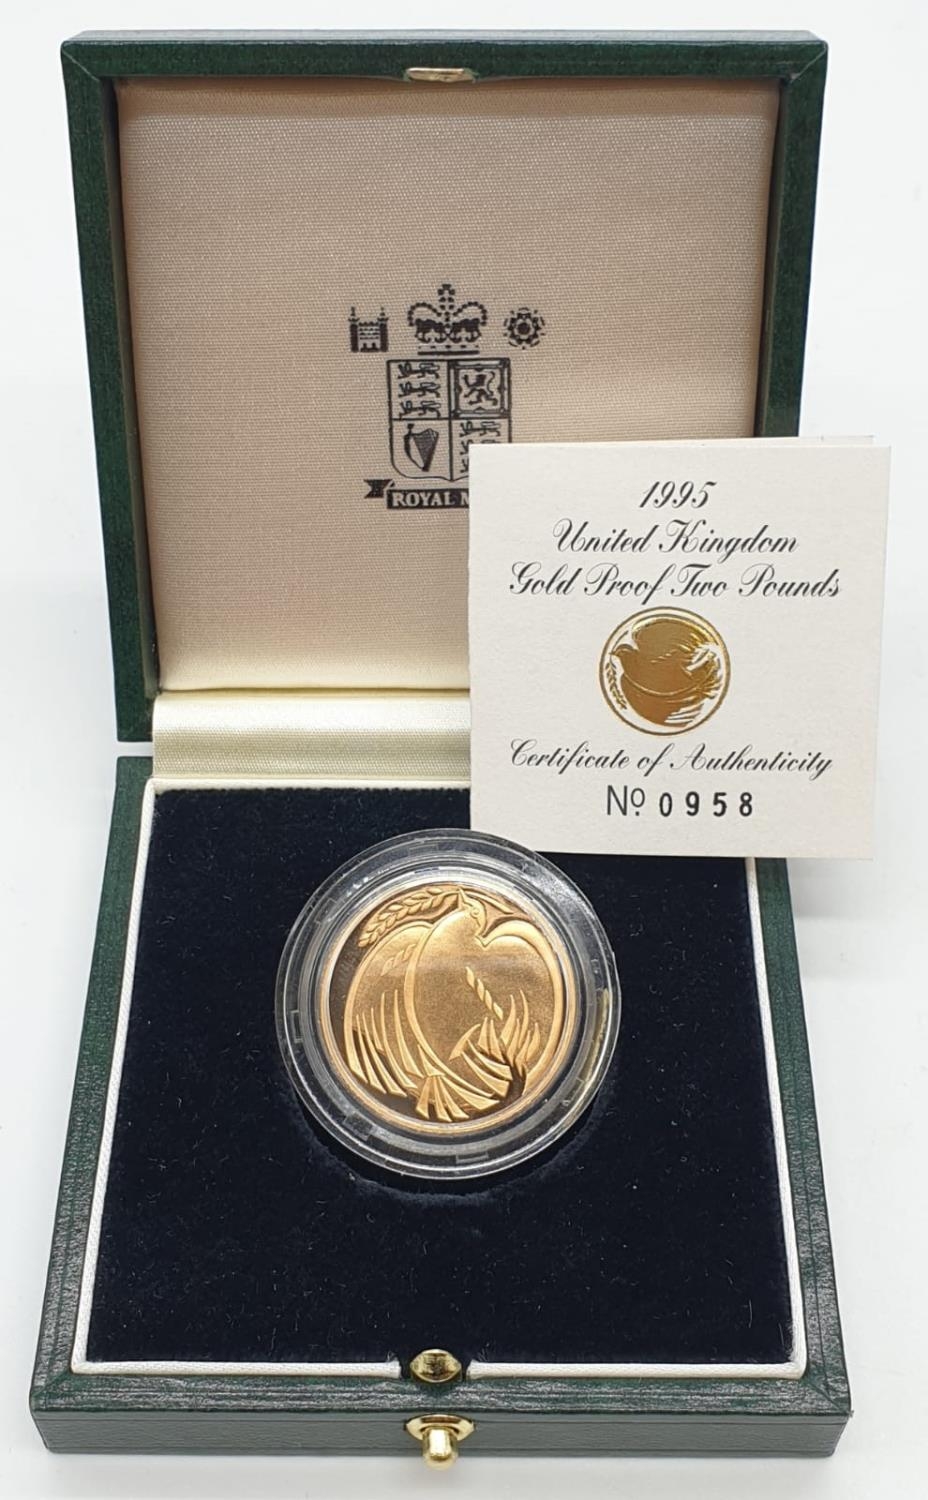 1995 UK GOLD PROOF £2 COIN, 22ct GOLD WEIGHT 15.98g, IN ORIGINAL BOX AND PAPER